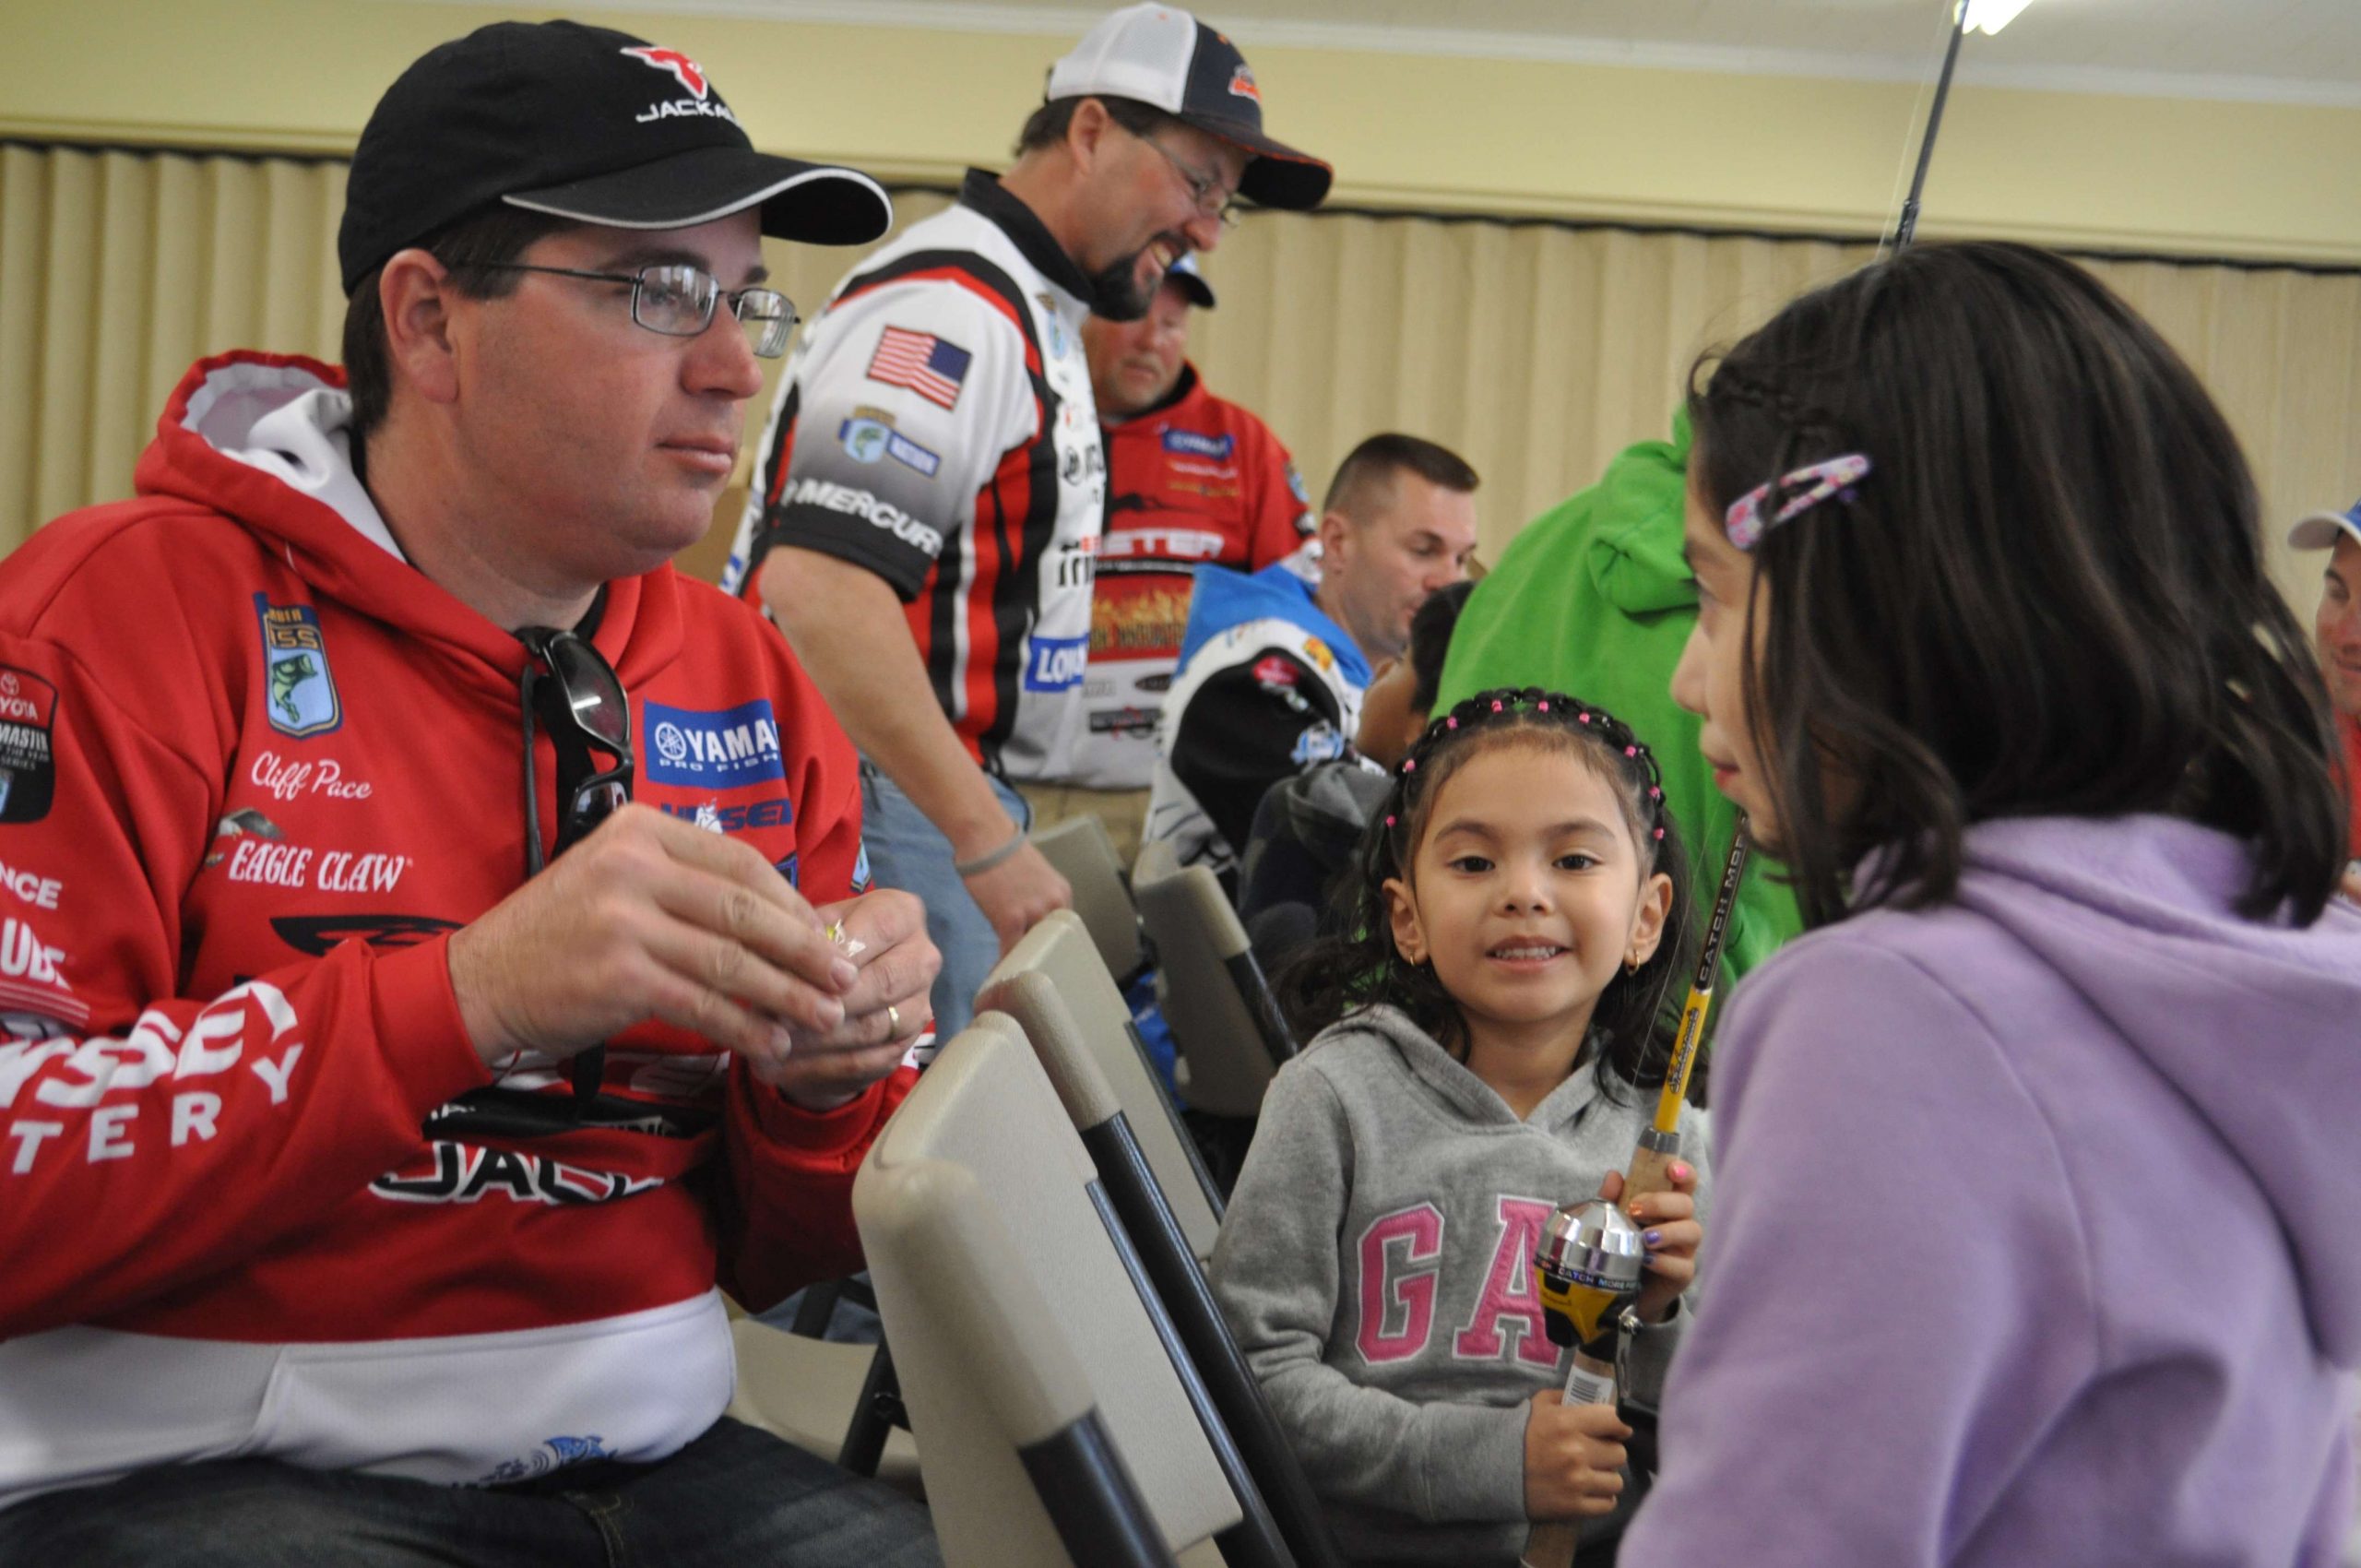 Cliff Pace, 2013 Bassmaster Classic champion, helps two young ladies tie their baits on after they picked out a bright chartreuse lure.